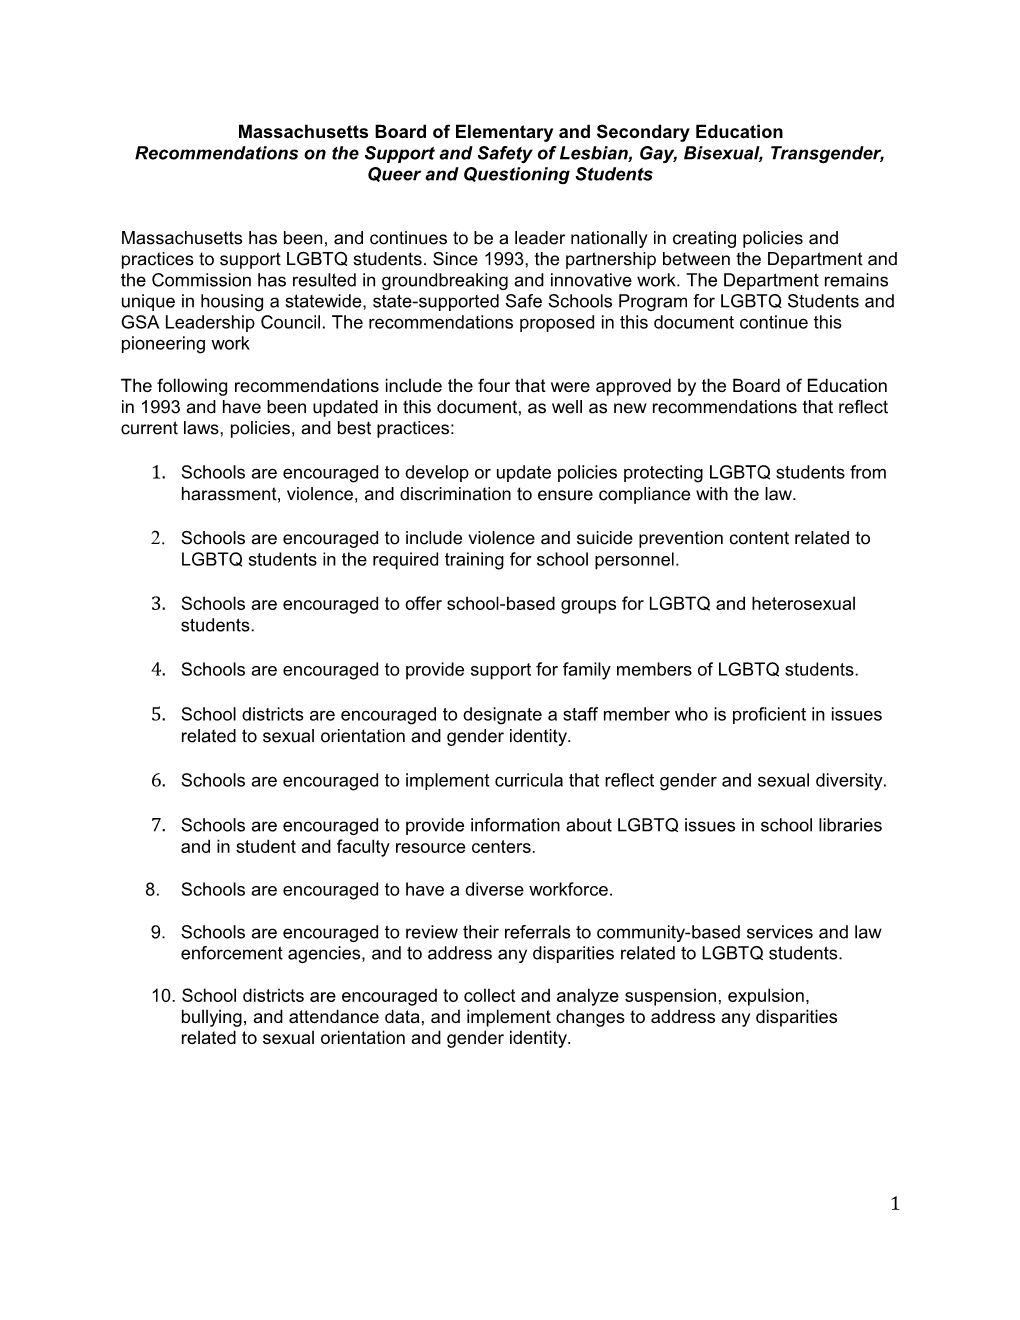 Recommendations on the Support and Safety of Lesbian, Gay, Bisexual, Transgender, Queer